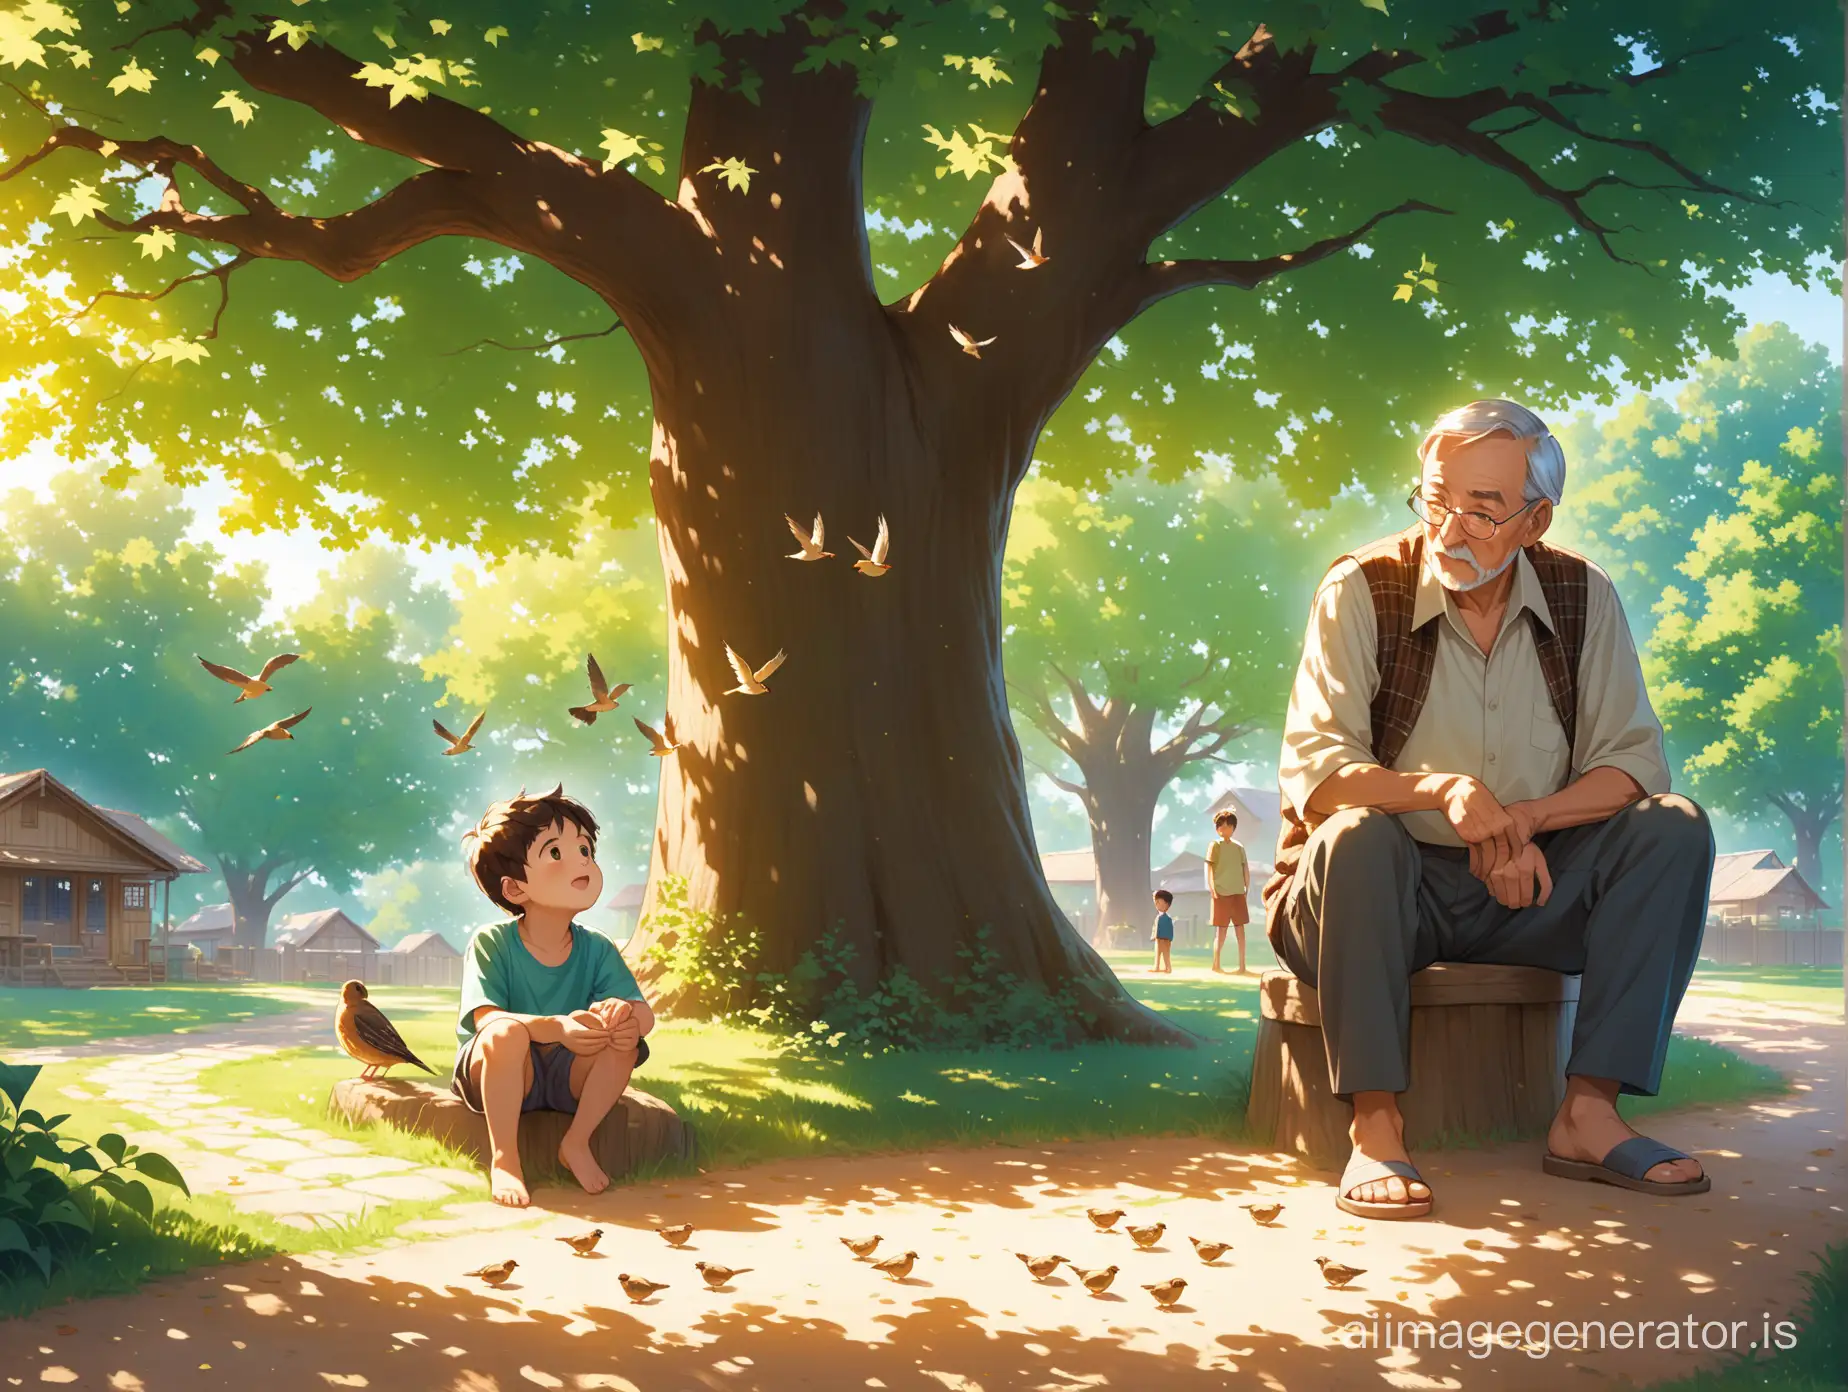 In the backyard of a cozy house nestled in a small village, a young boy and an old grandfather sat under the shade of a big oak tree, the boy's eager expression reflecting his curiosity as he listened to the grandfather's stories. The dappled sunlight danced through the leaves, casting intricate patterns on the ground, while birds chirped melodiously in the background.